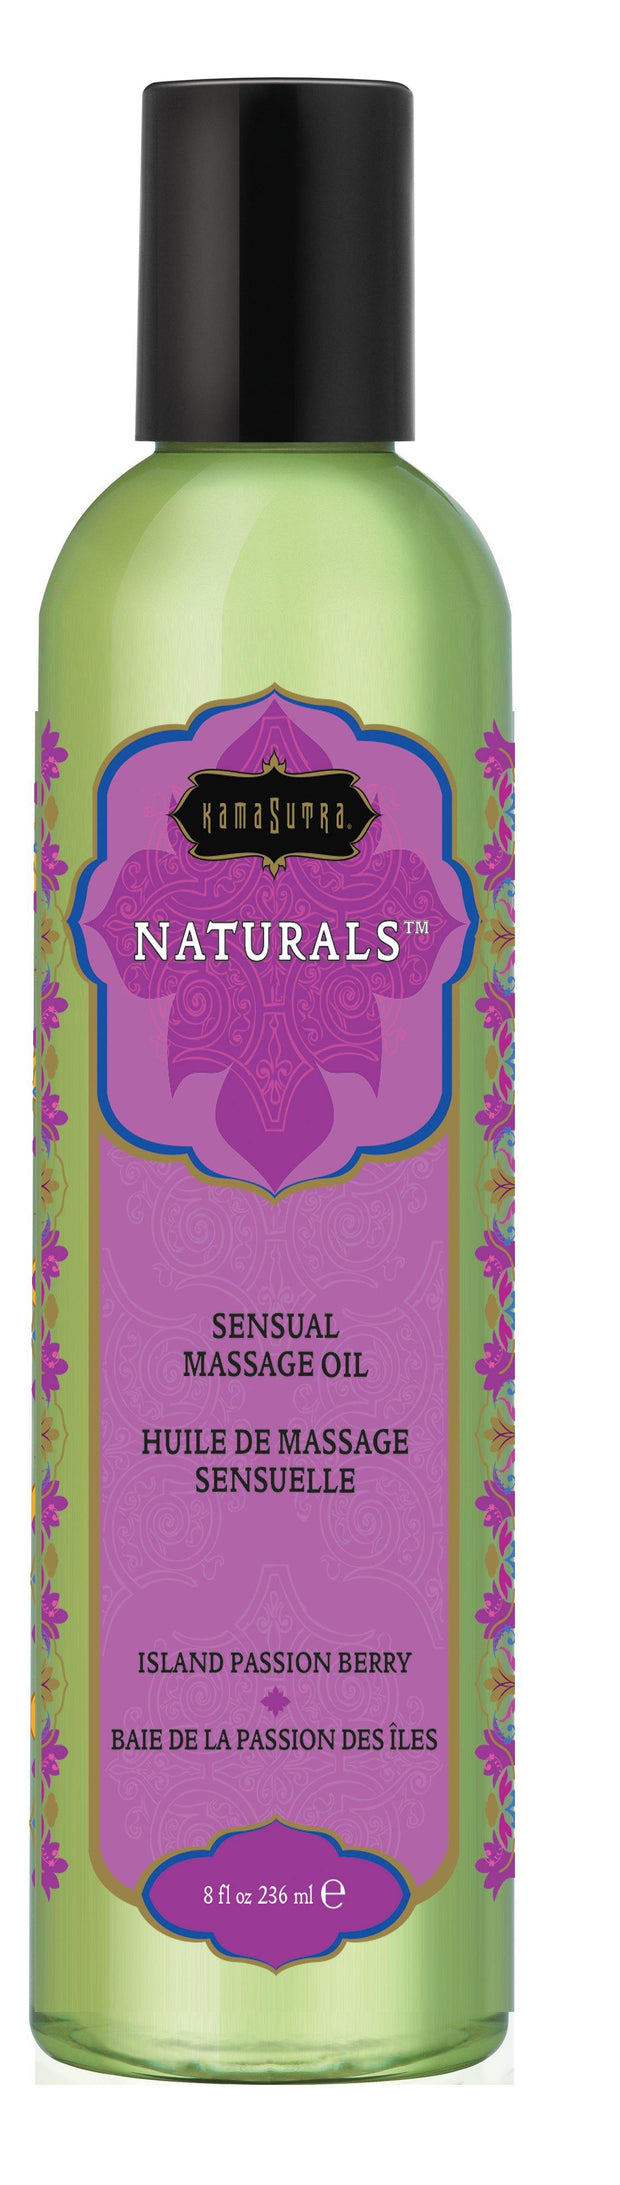 Naturals Massage Oil - Island Passion Berry - Layla Undercover Lingerie